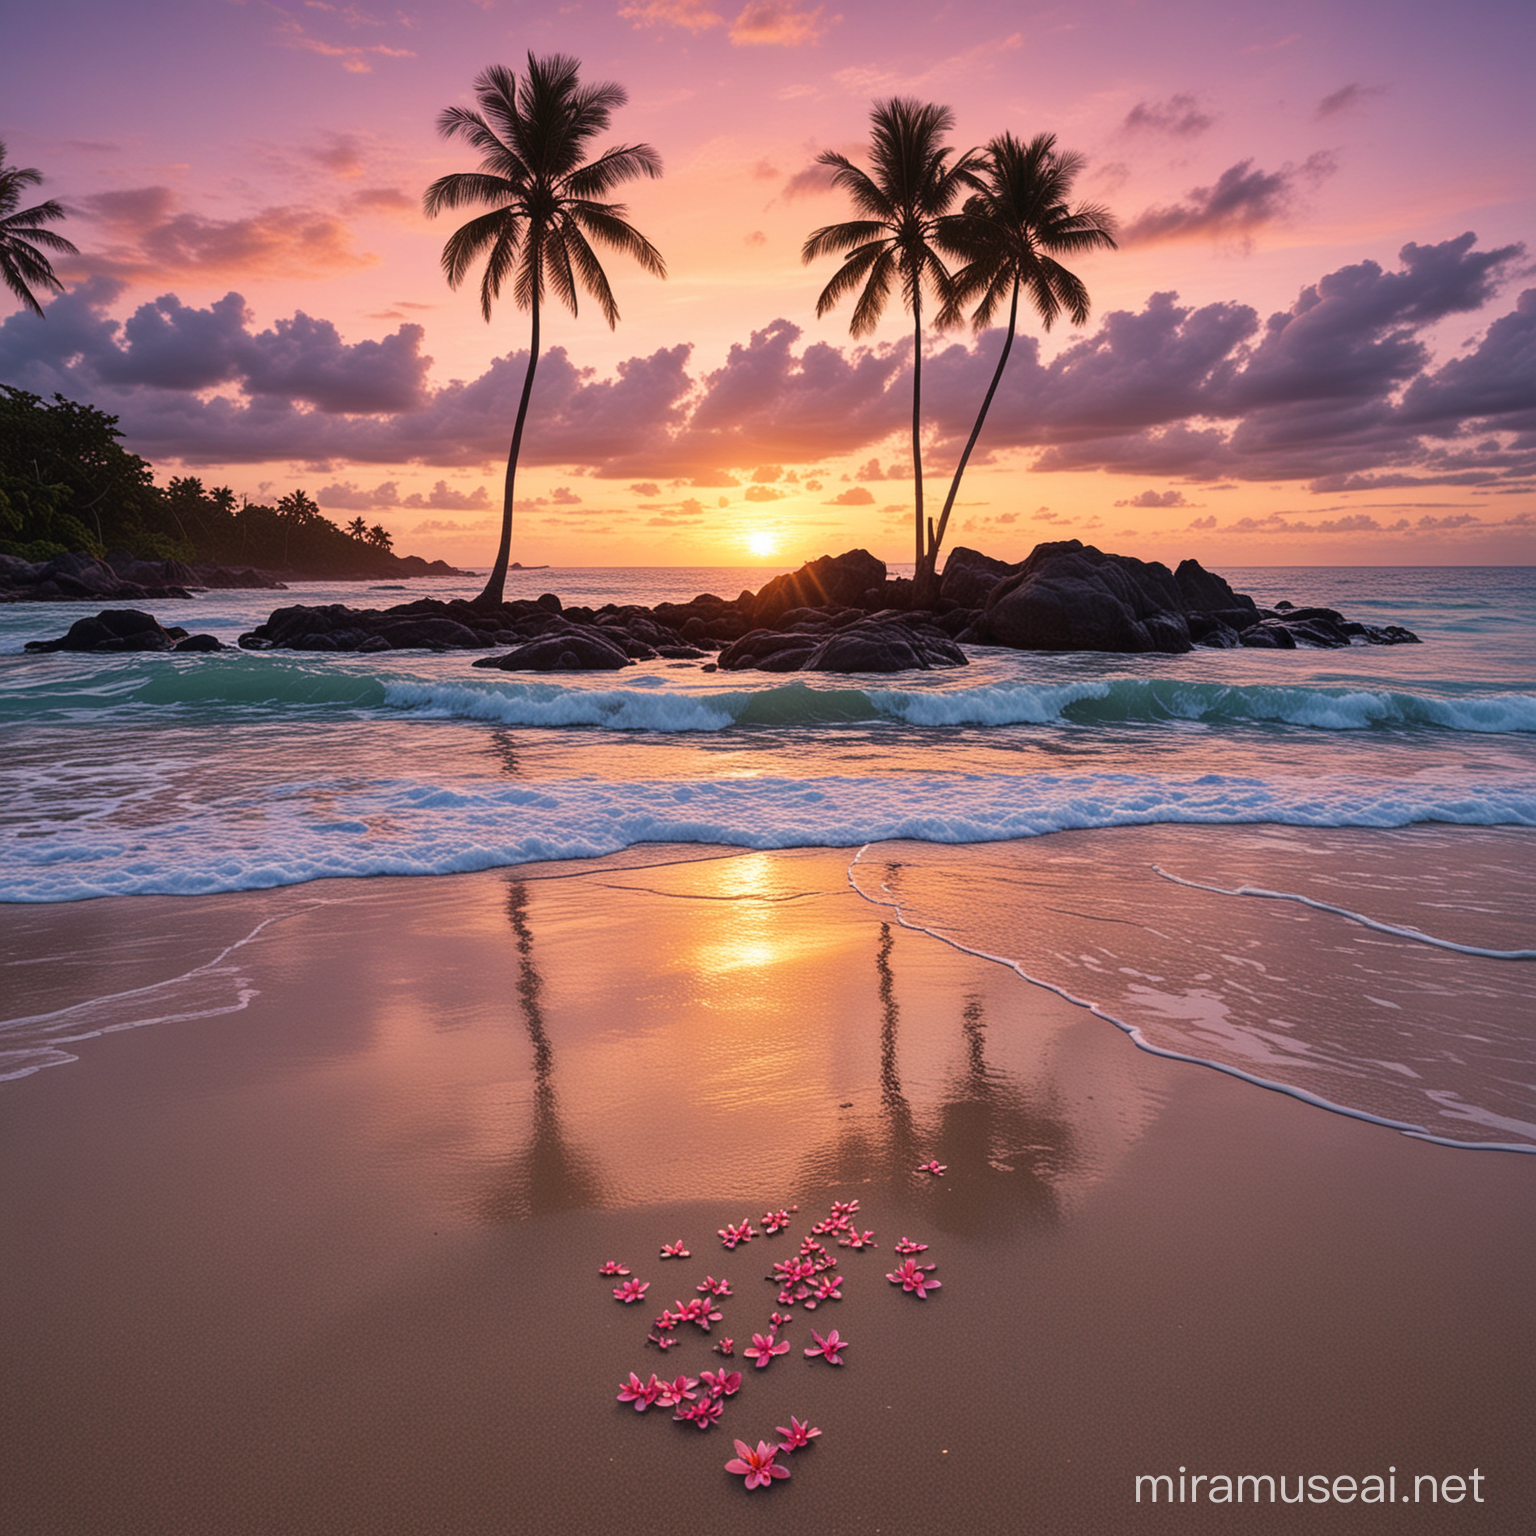 Imagine a picturesque and serene tropical beach scene unfolding at sunset, where nature's beauty is on full display in a harmonious symphony of colors and textures. The sky above transitions from a mesmerizing gradient of purple to orange, casting a warm and enchanting glow over the landscape below.

Two majestic coconut palm trees, adorned with lush green fronds, sway gently in the soft breeze, their silhouettes creating a tranquil frame against the vibrant sky. The soft, white sand of the beach stretches out in a pristine expanse, undisturbed except for a trail of distinct footprints leading towards the water, hinting at the recent passage of a solitary wanderer captivated by the beauty of the scene.

The calm sea mirrors the hues of the sunset, its surface shimmering with a reflective sheen that adds to the overall sense of tranquility and peace. Just offshore, smooth, dark rocks emerge from the shallow waters, their presence adding a touch of rugged elegance to the otherwise serene seascape, with small waves gently caressing their bases in a soothing rhythm.

Amidst this tropical paradise, vibrant pink frangipani flowers bloom, their delicate petals adding a splash of color and exotic fragrance to the scene, infusing the air with a tropical essence that heightens the sensory experience of this idyllic setting.

The lighting, soft and magical, bathes the entire scene in a warm and ethereal glow, evoking a sense of peace and wonder that beckons any viewer to step into this enchanting picture and immerse themselves in the solitude and beauty of this tropical paradise, where time seems to stand still and the serenity of nature reigns supreme, 32k render, hyperrealistic, detailled.